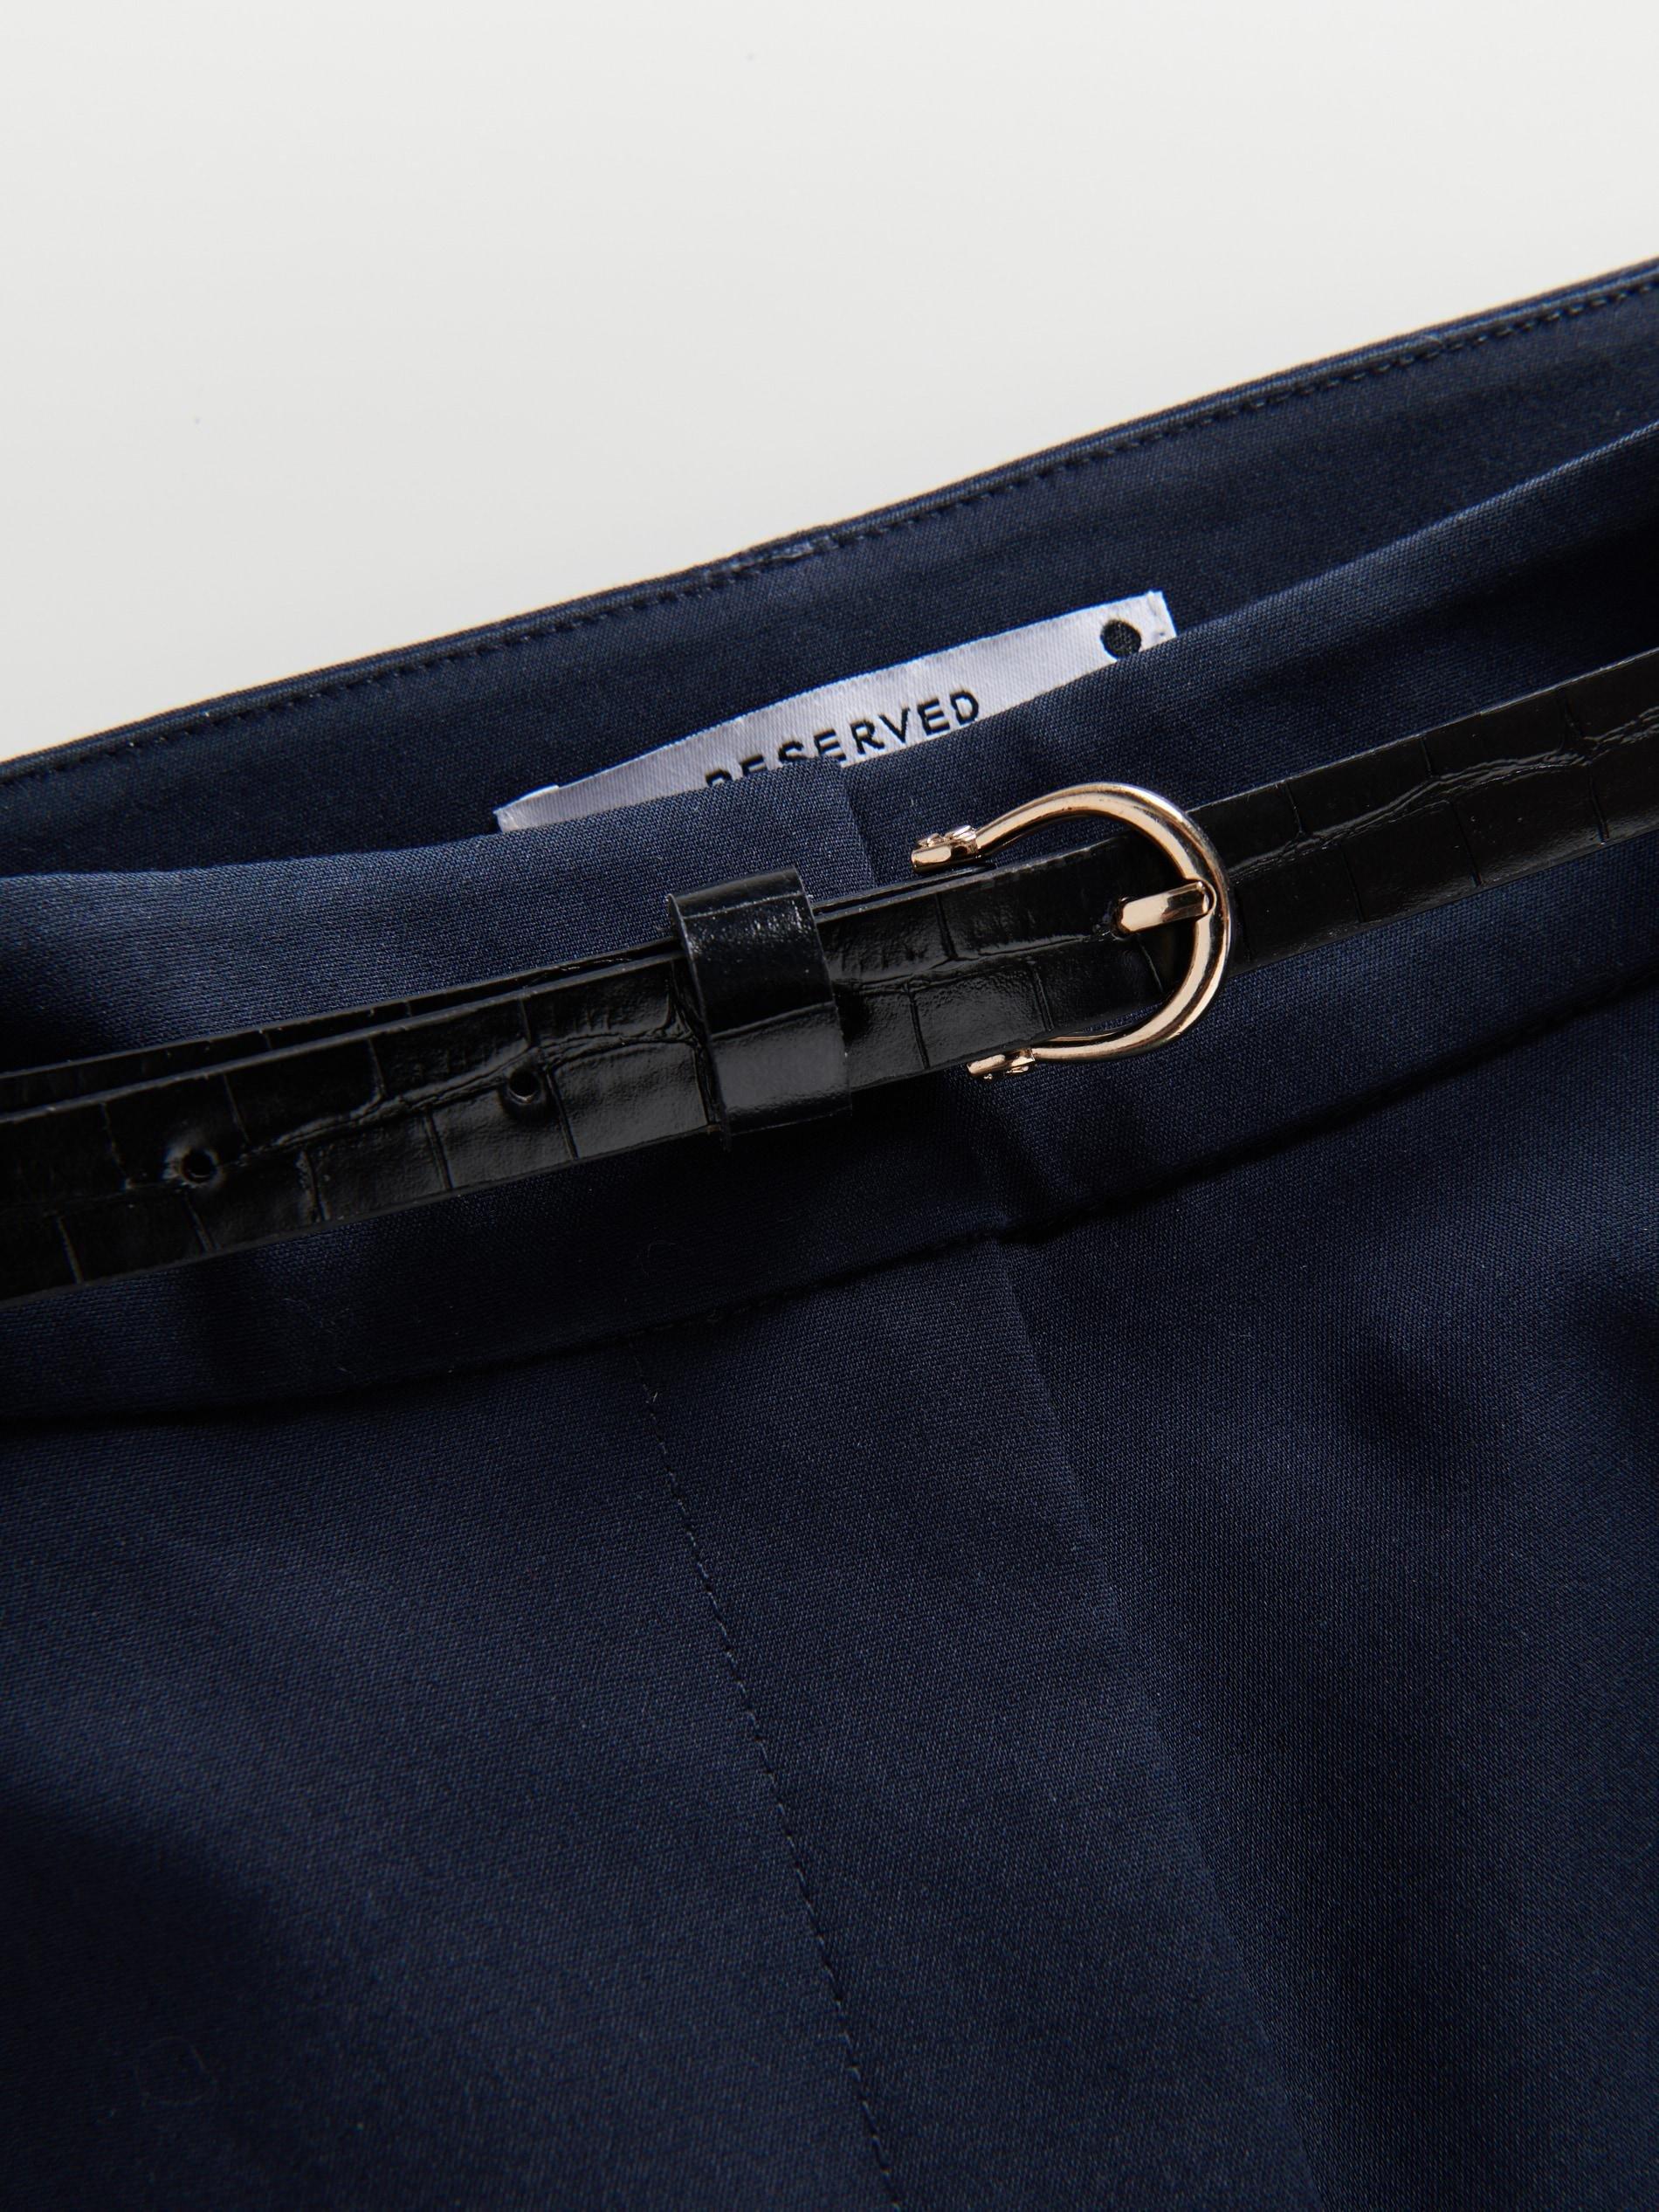 Reserved - Navy Cigarette Trousers